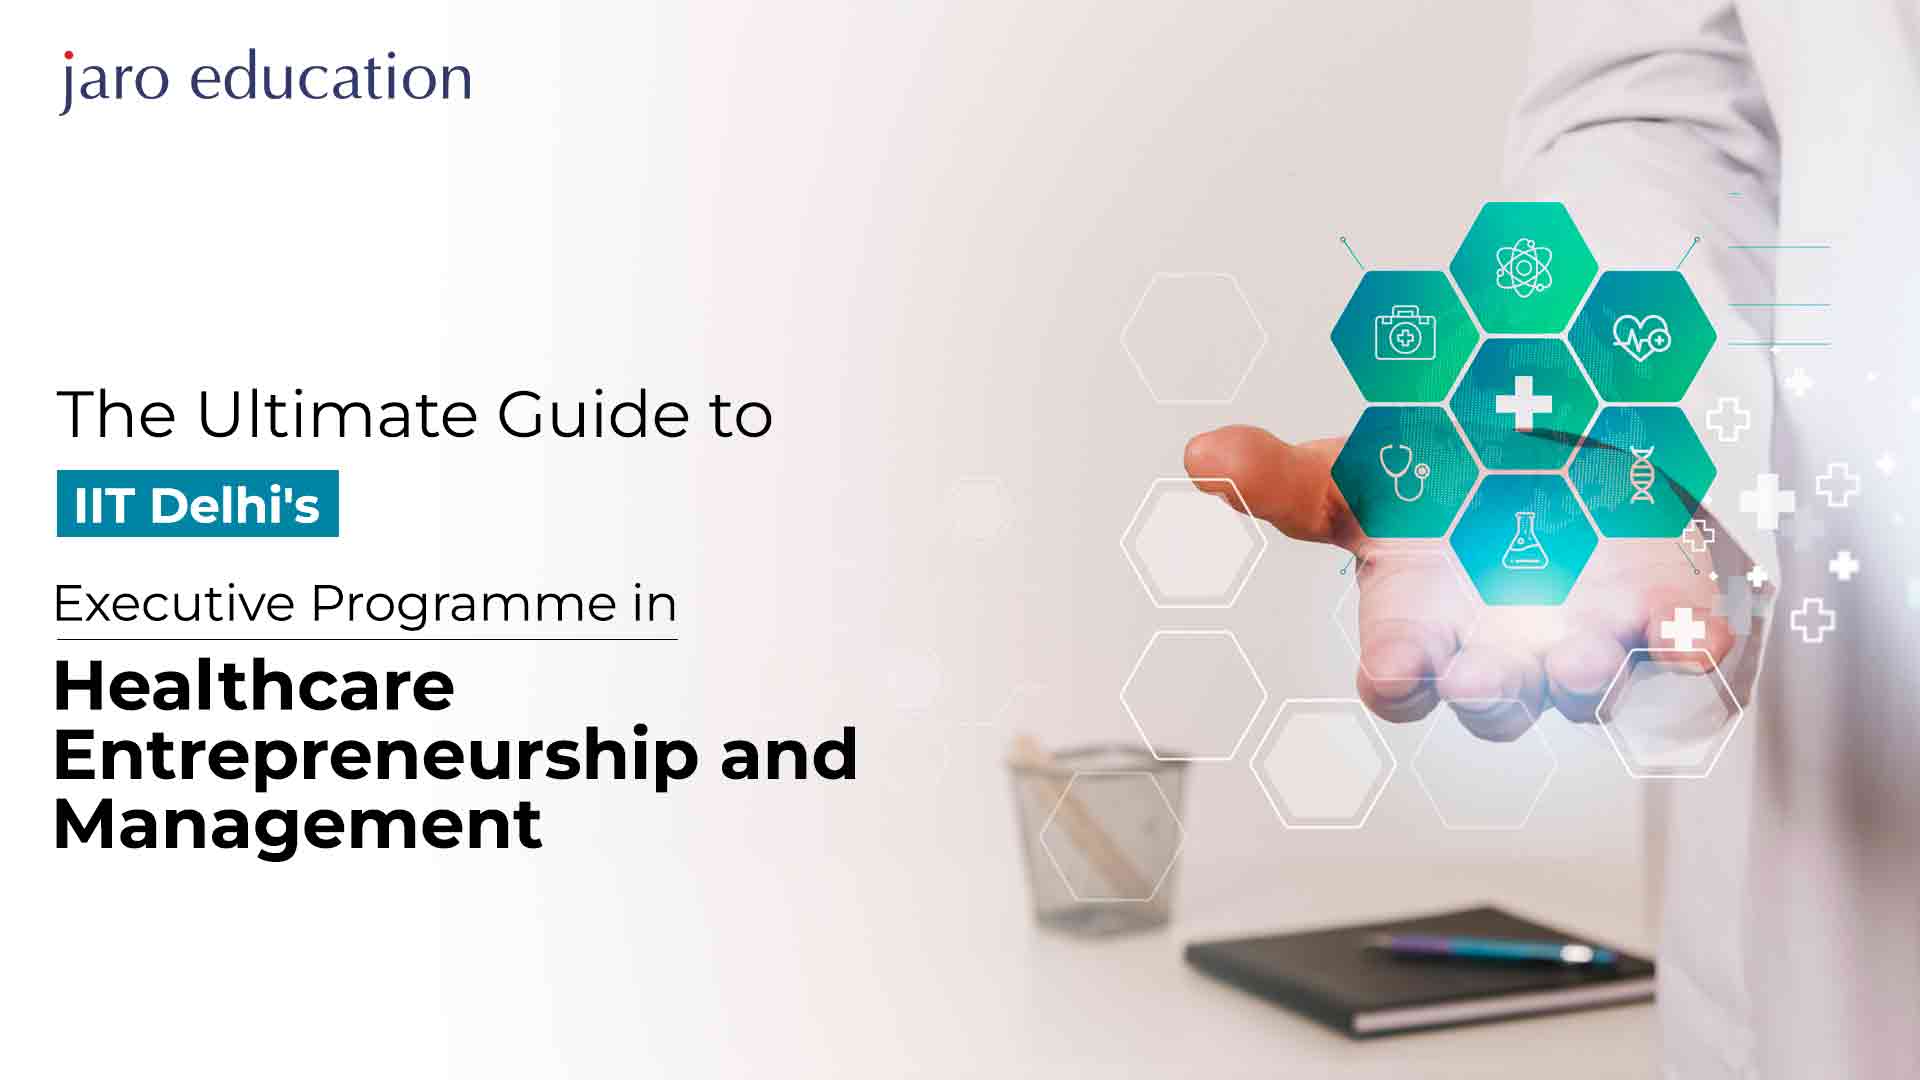 The-Ultimate-Guide-to-IIT-Delhi's-Executive-Programme-in-Healthcare-Entrepreneurship-and-Management jaro